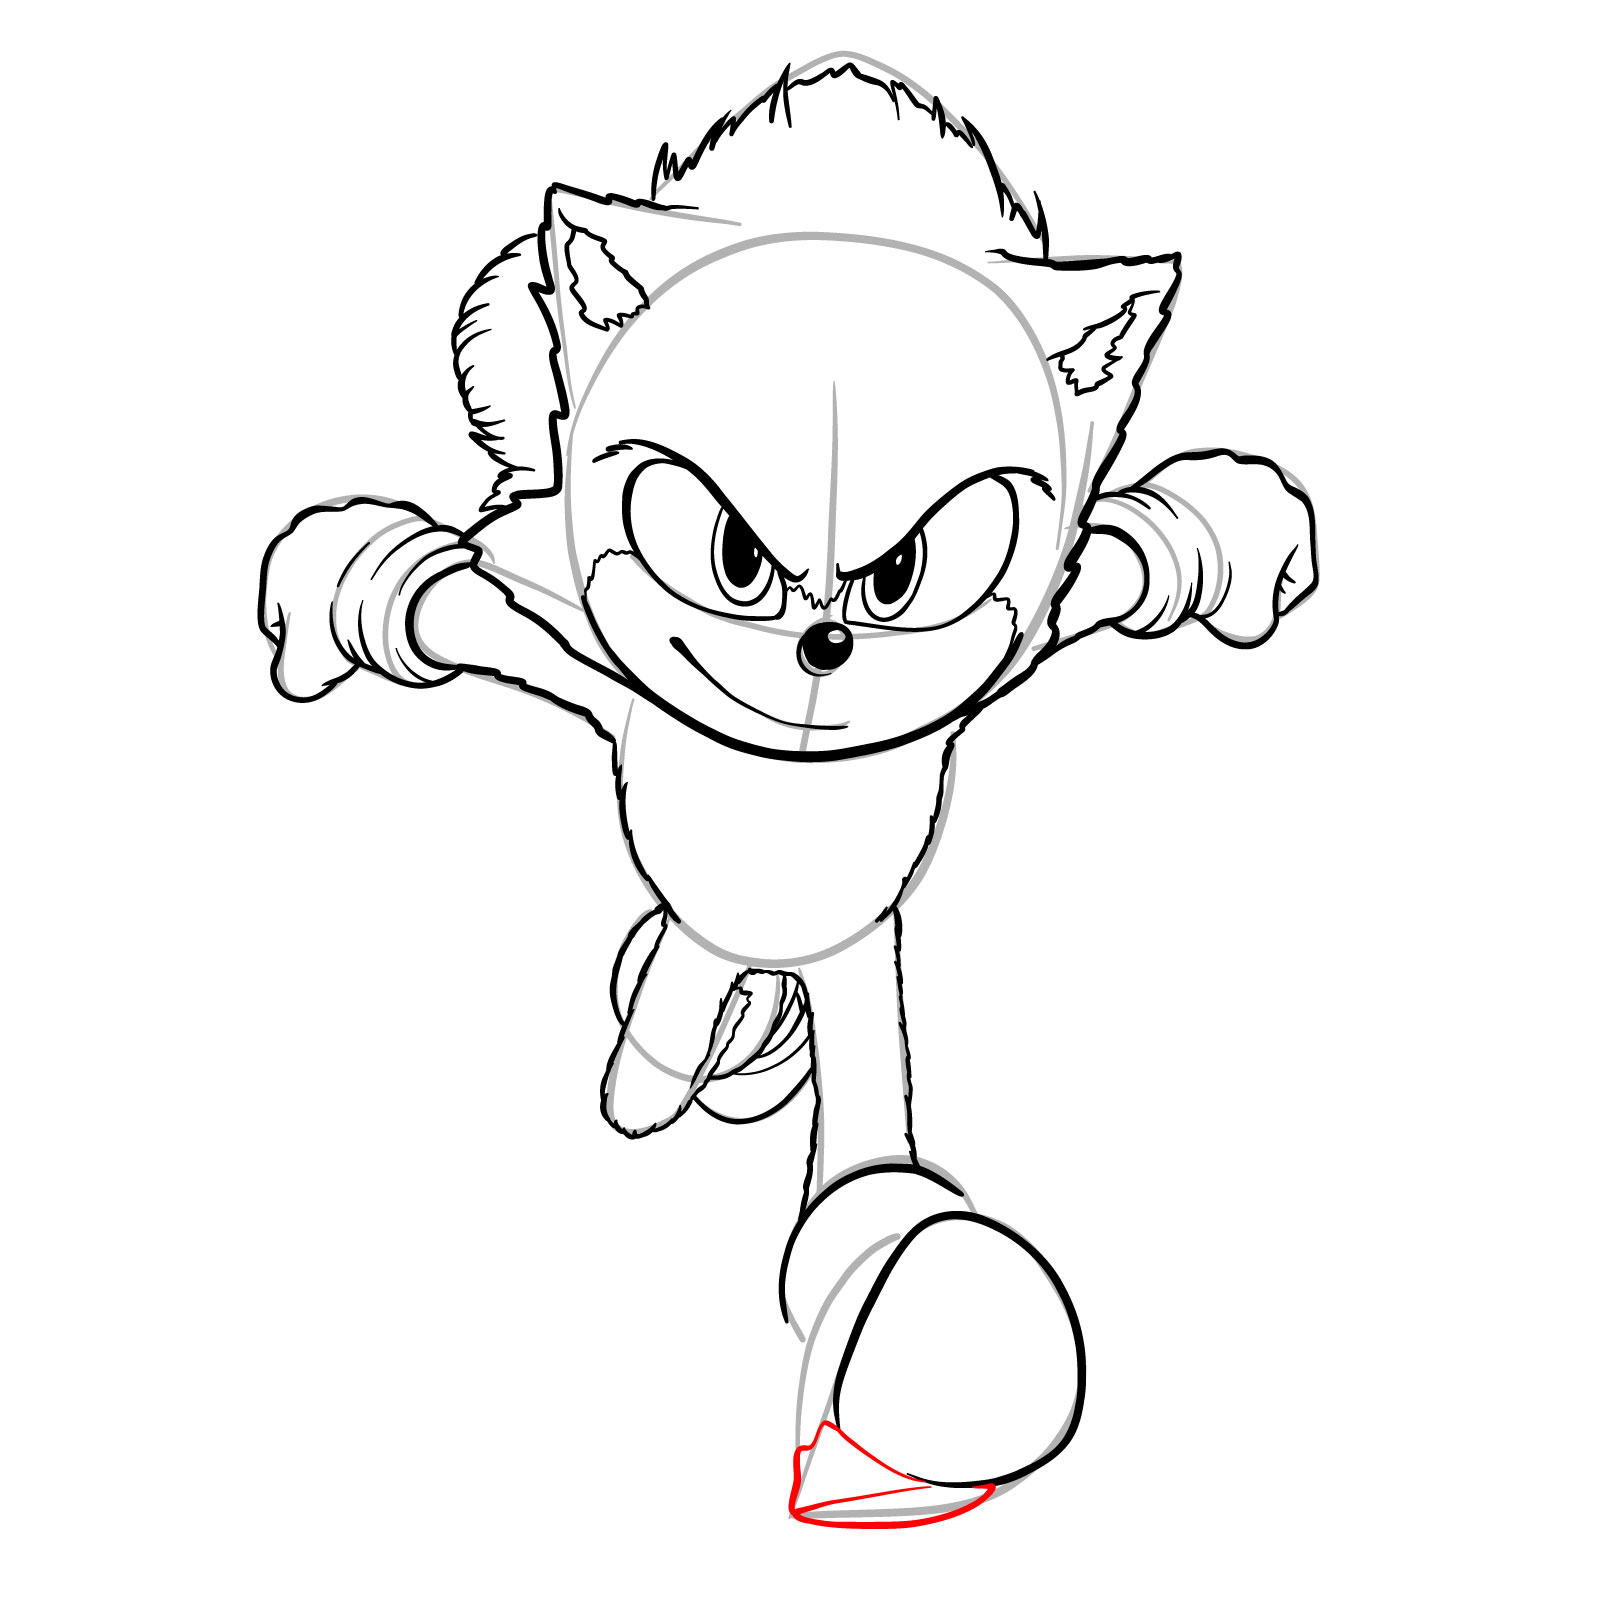 How to draw Sonic from the movie - step 26